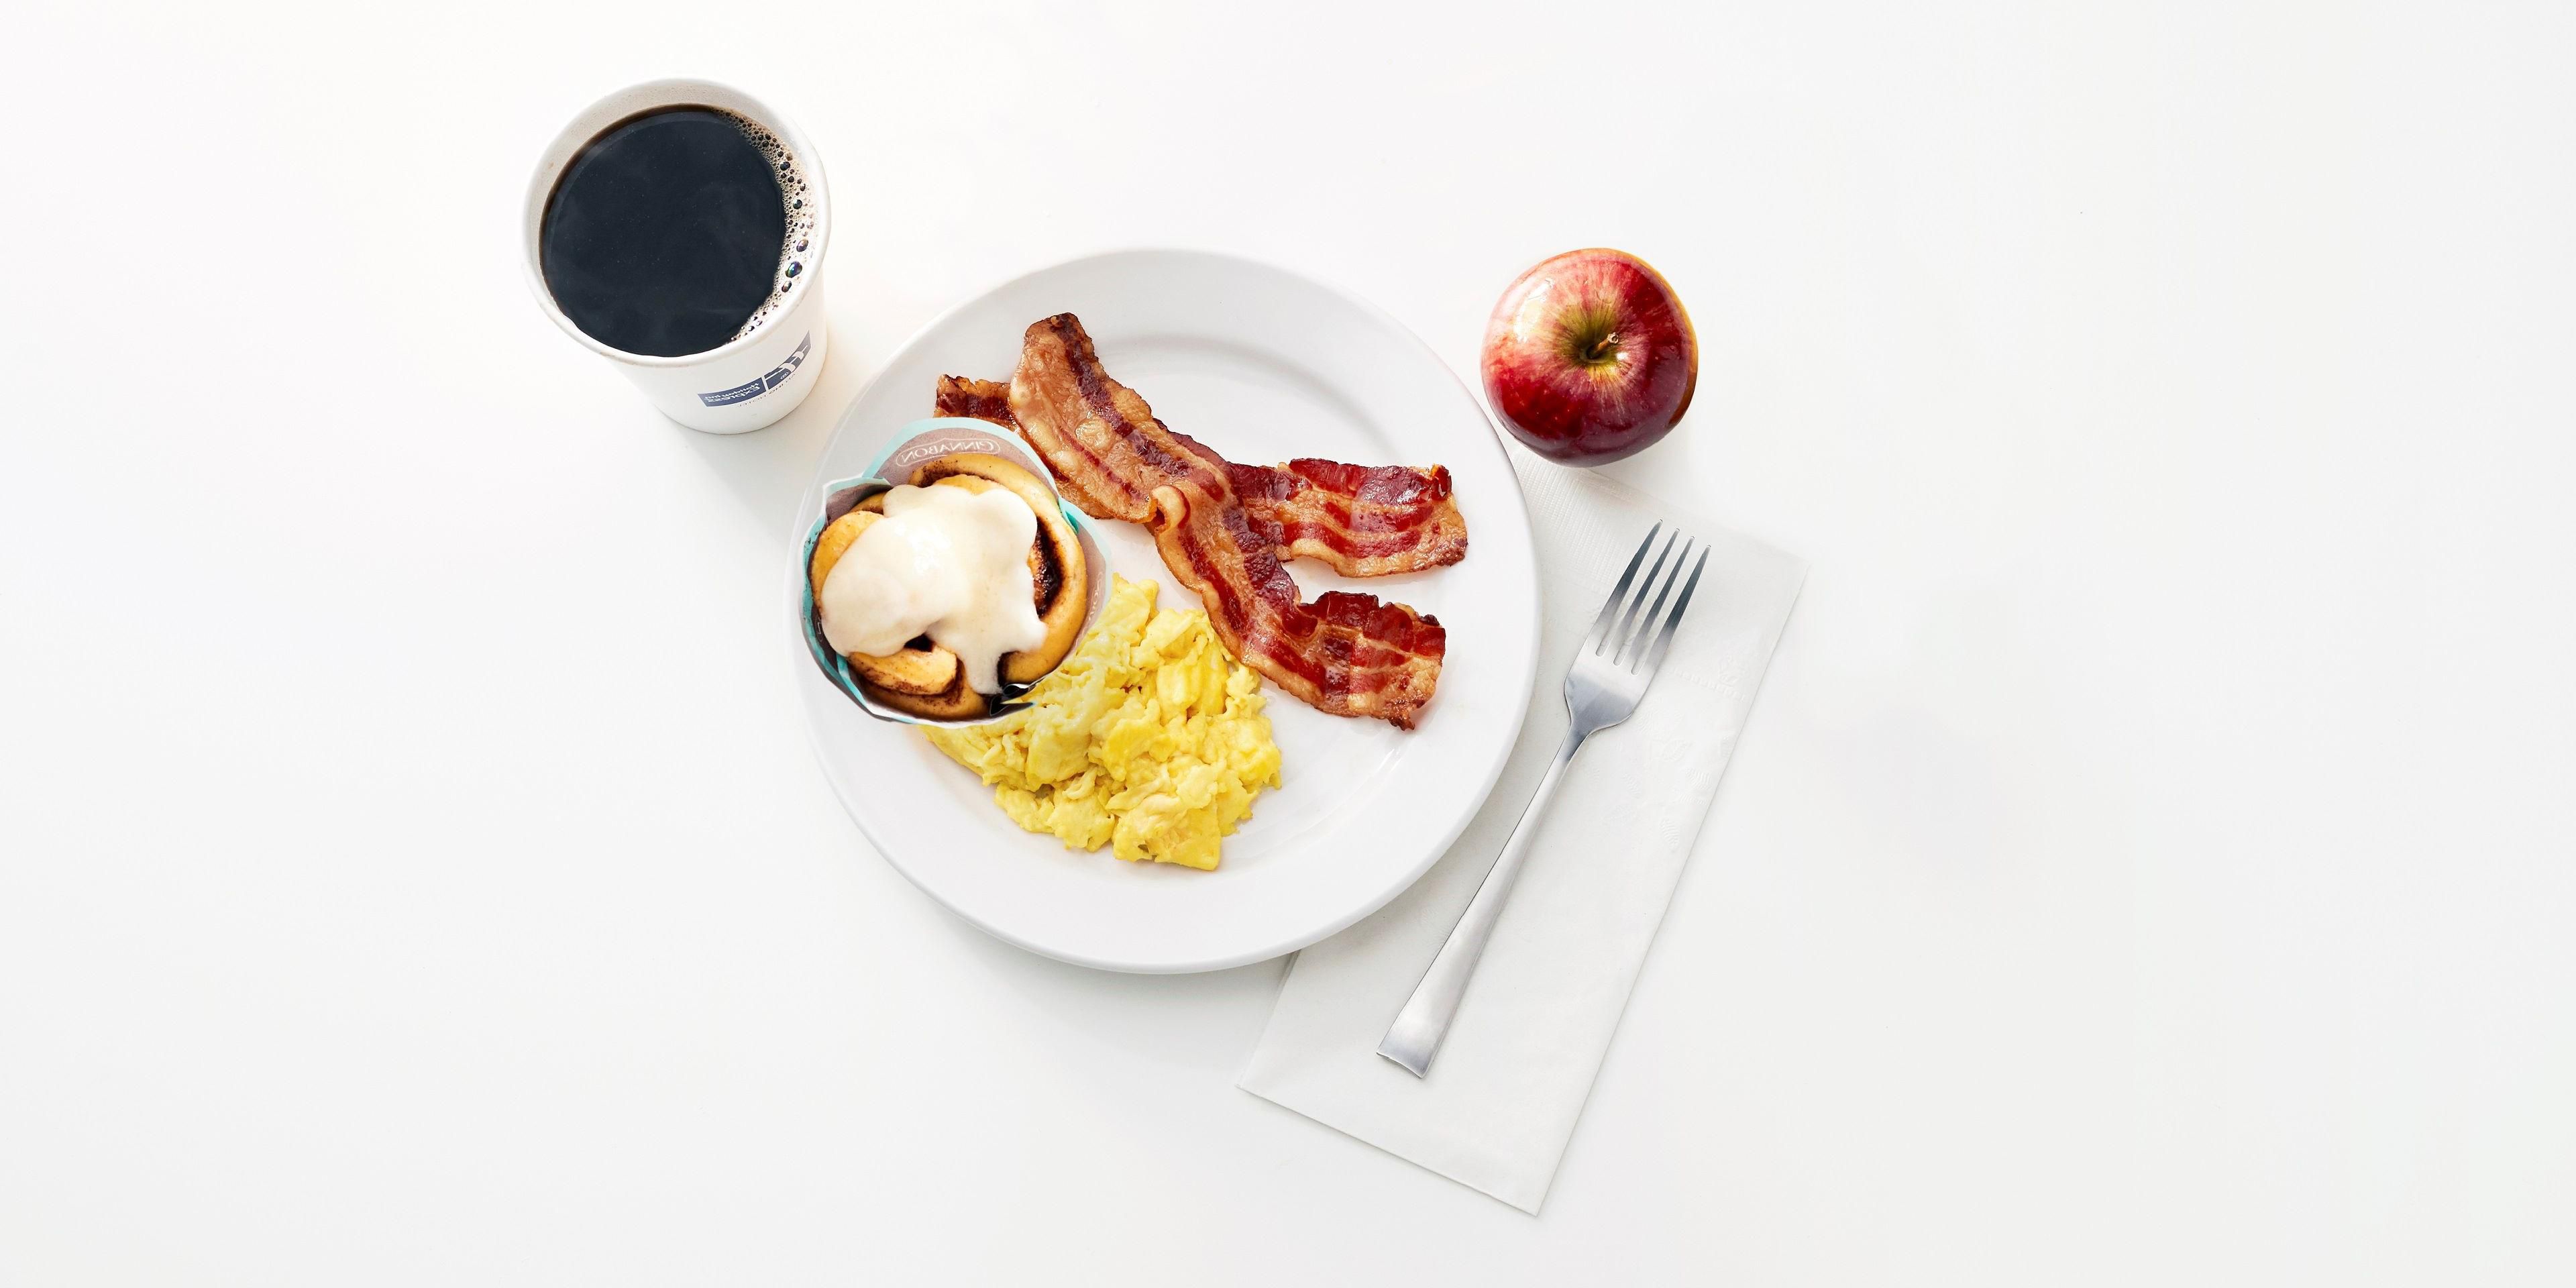 Kick start your day with our Express Start Breakfast, with grab ‘n’ go options and favorites such as eggs and bacon, hot pancakes, our signature cinnamon rolls and fresh coffee. Offered from 6:30am to 9:30am.